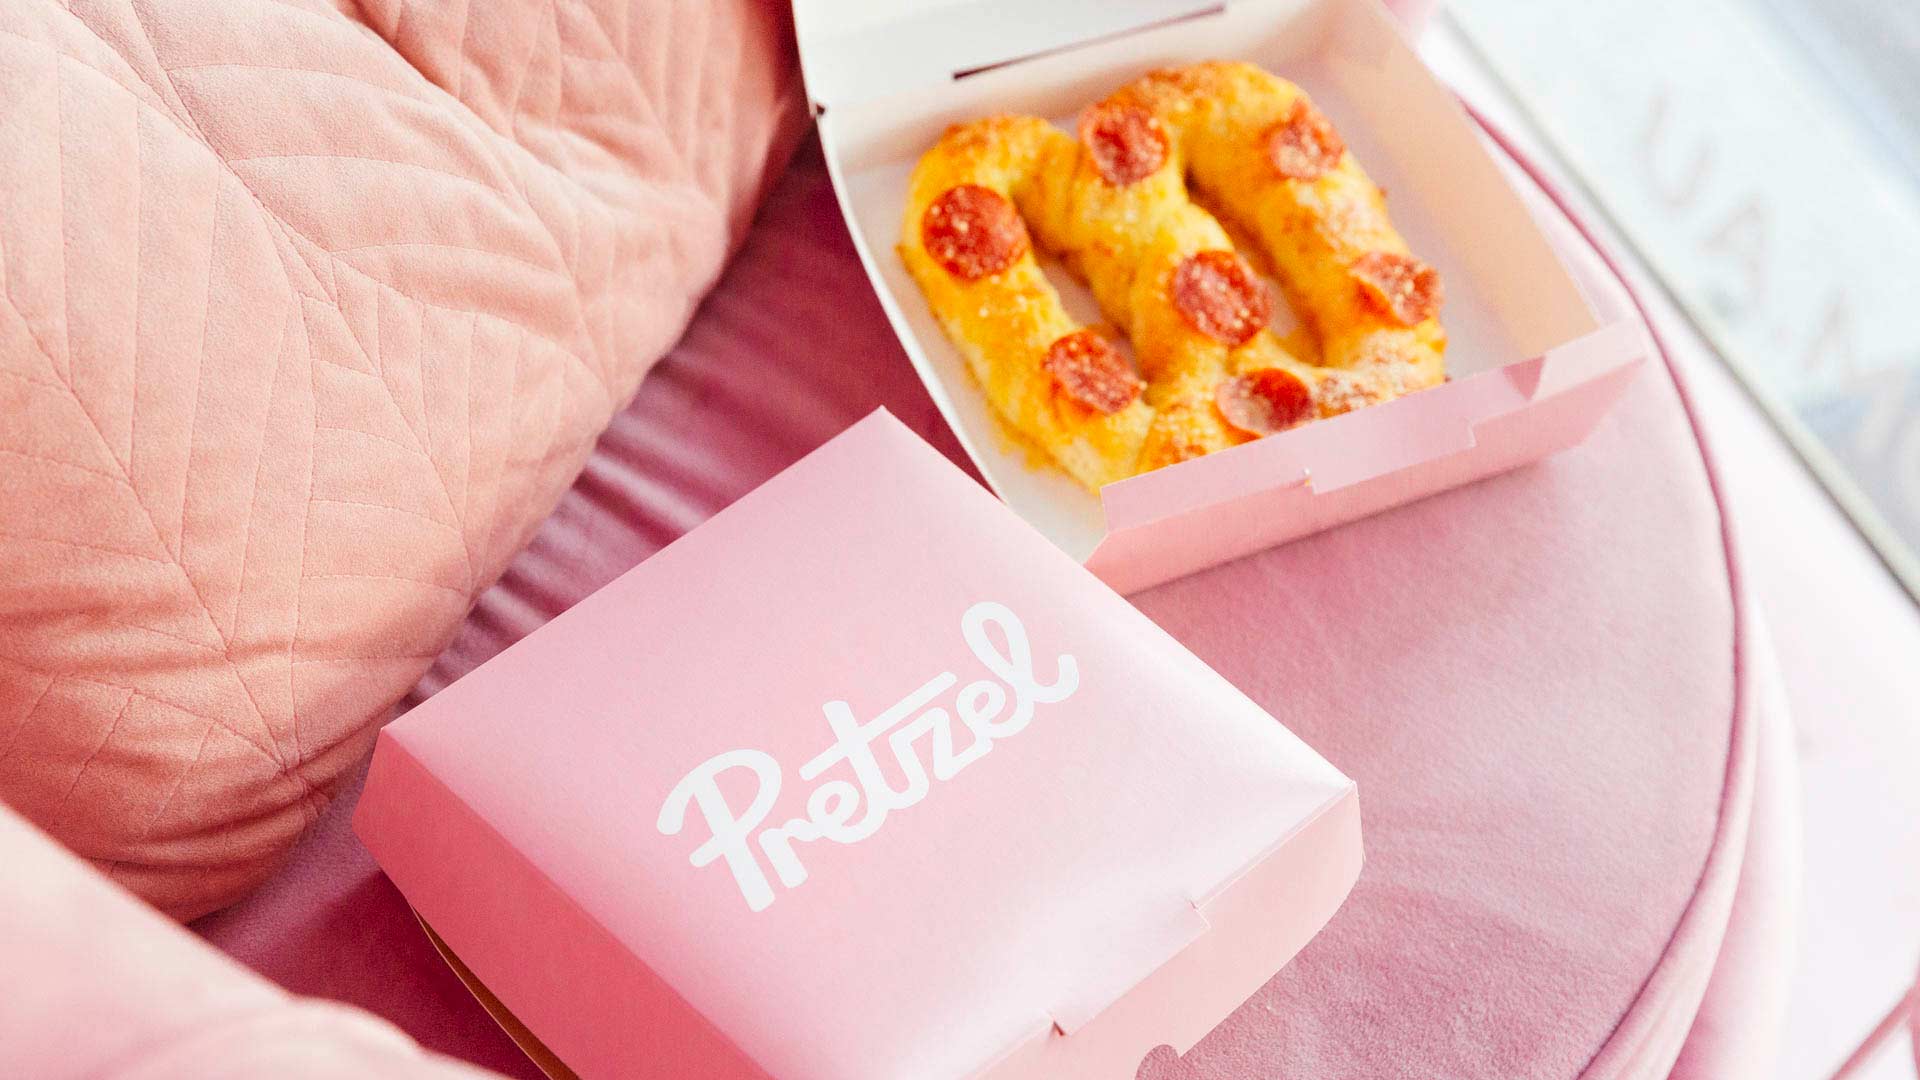 An All-Pink Pretzel Shop Has Opened Its Colourful Doors in South Yarra